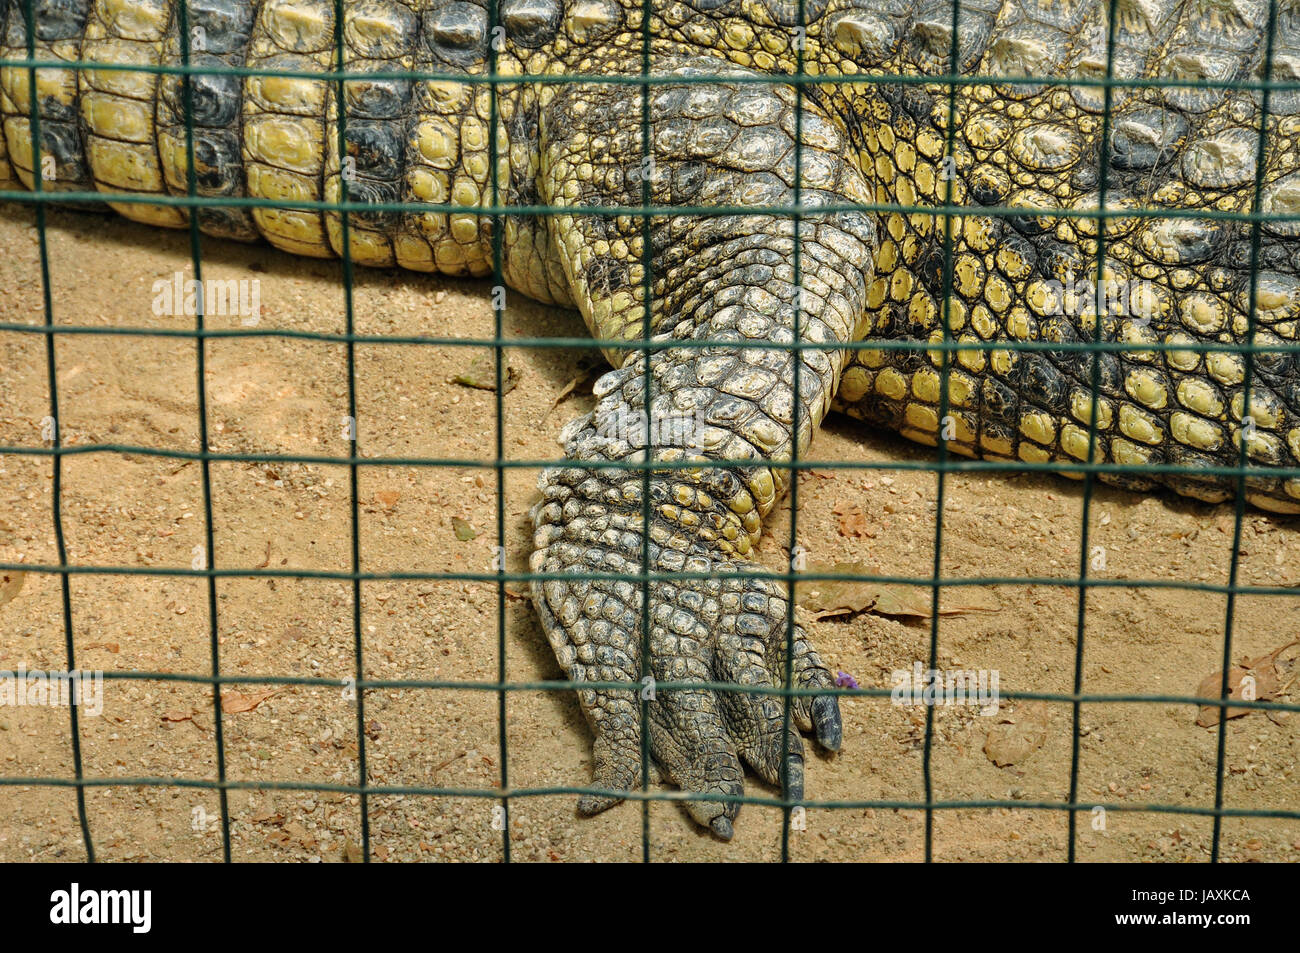 Nile crocodile claws and skin detail of dangerous reptile in captivity. Wild animal. Stock Photo